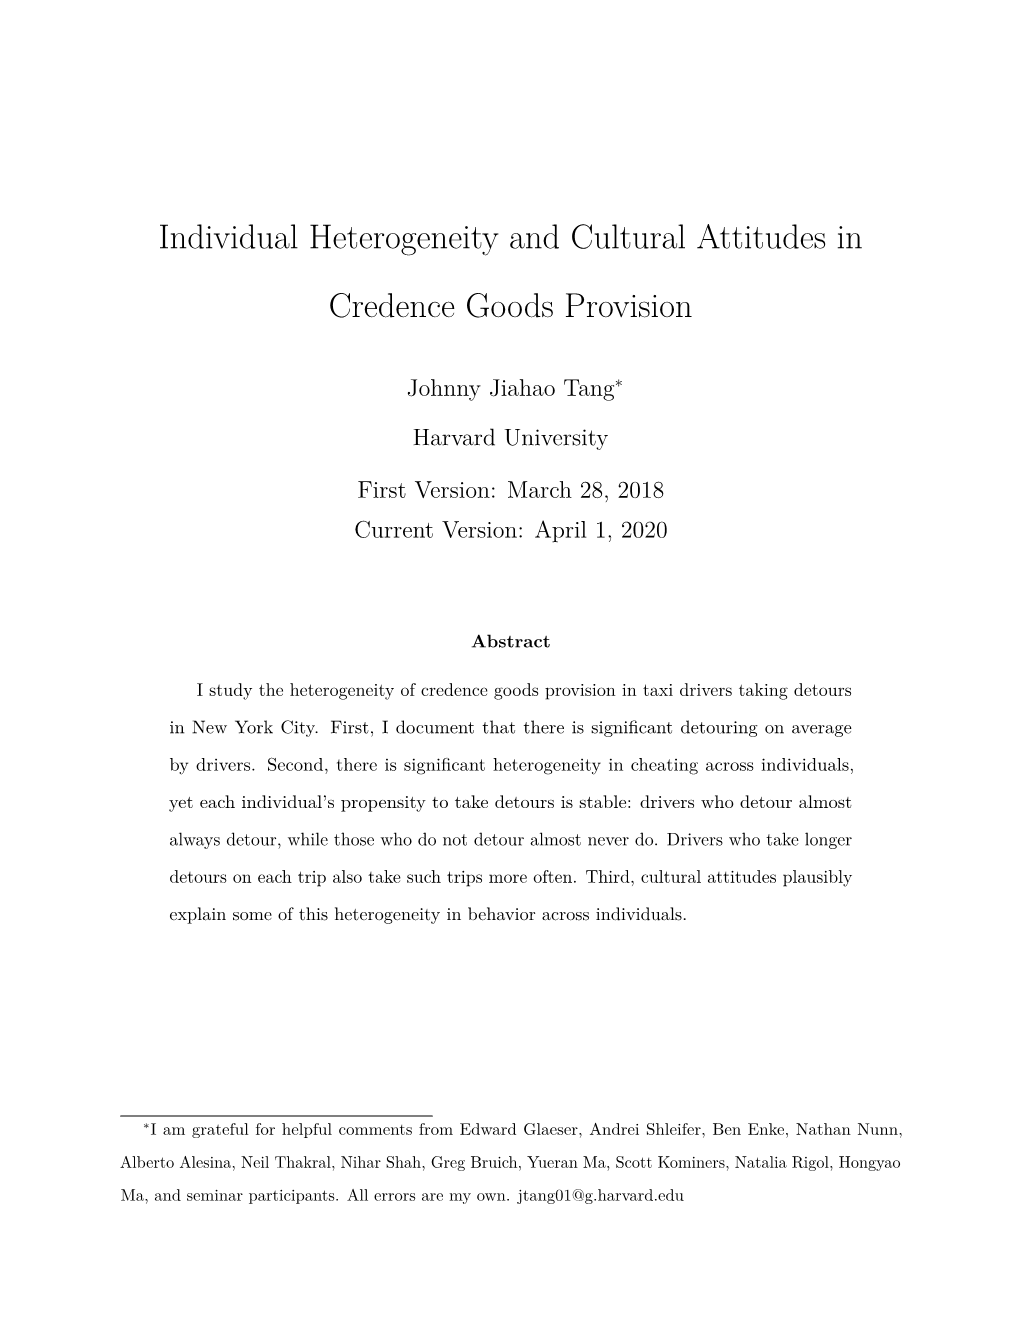 Individual Heterogeneity and Cultural Attitudes in Credence Goods Provision